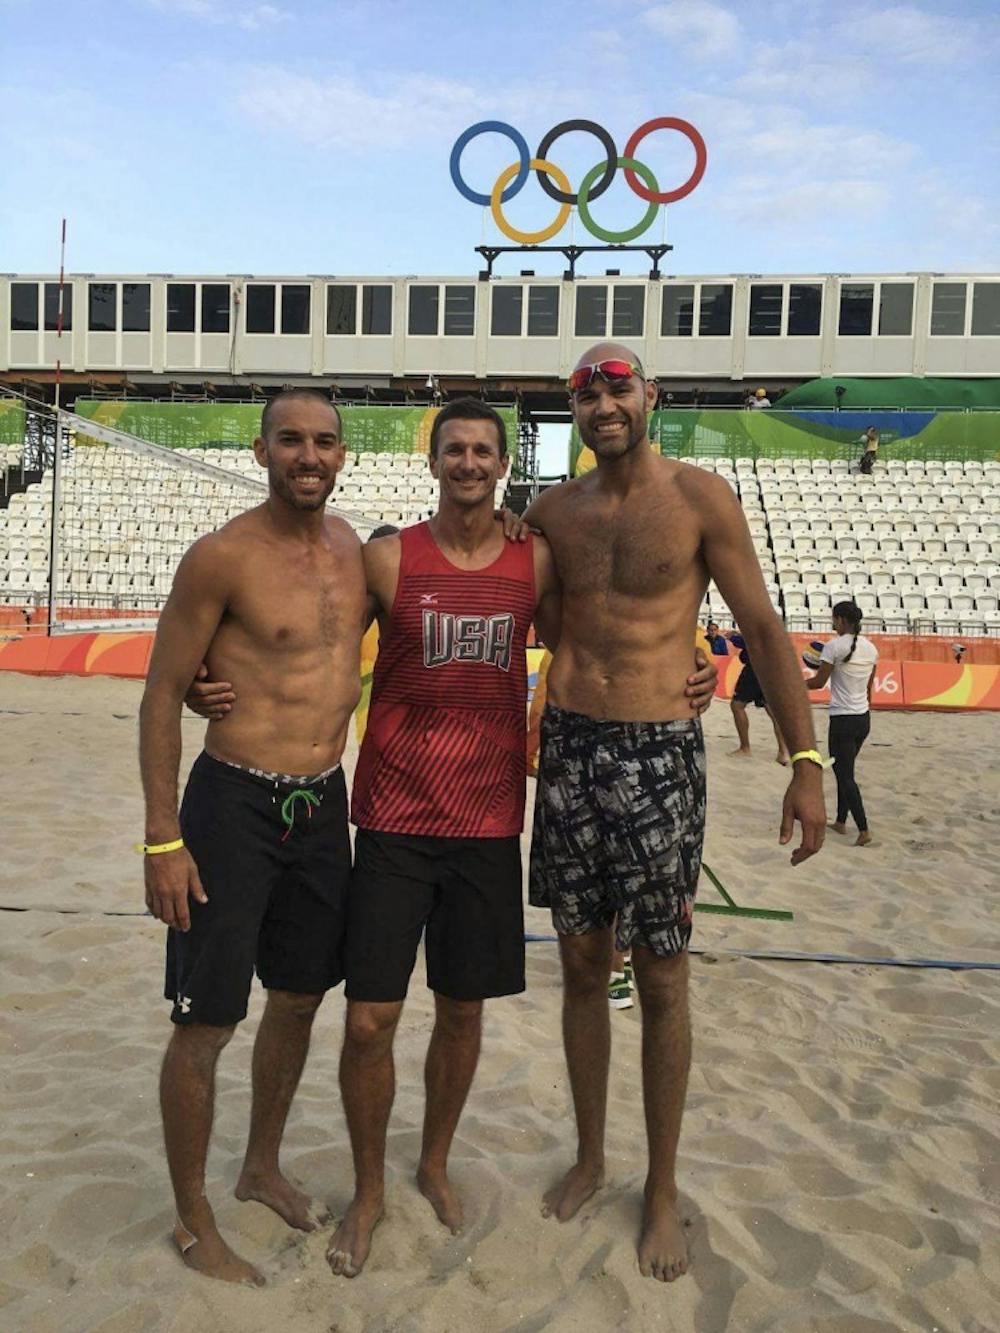 <p>Paul Baxter made his Olympic Games coaching debut as the head coach for beach volleyball players Phil Dalhausser and Nick Lucena on the men’s side. Baxter also coached Lauren Fendrick and Brooke Sweat on the women’s side. <em>Photo Provided // Paul Baxter</em></p>